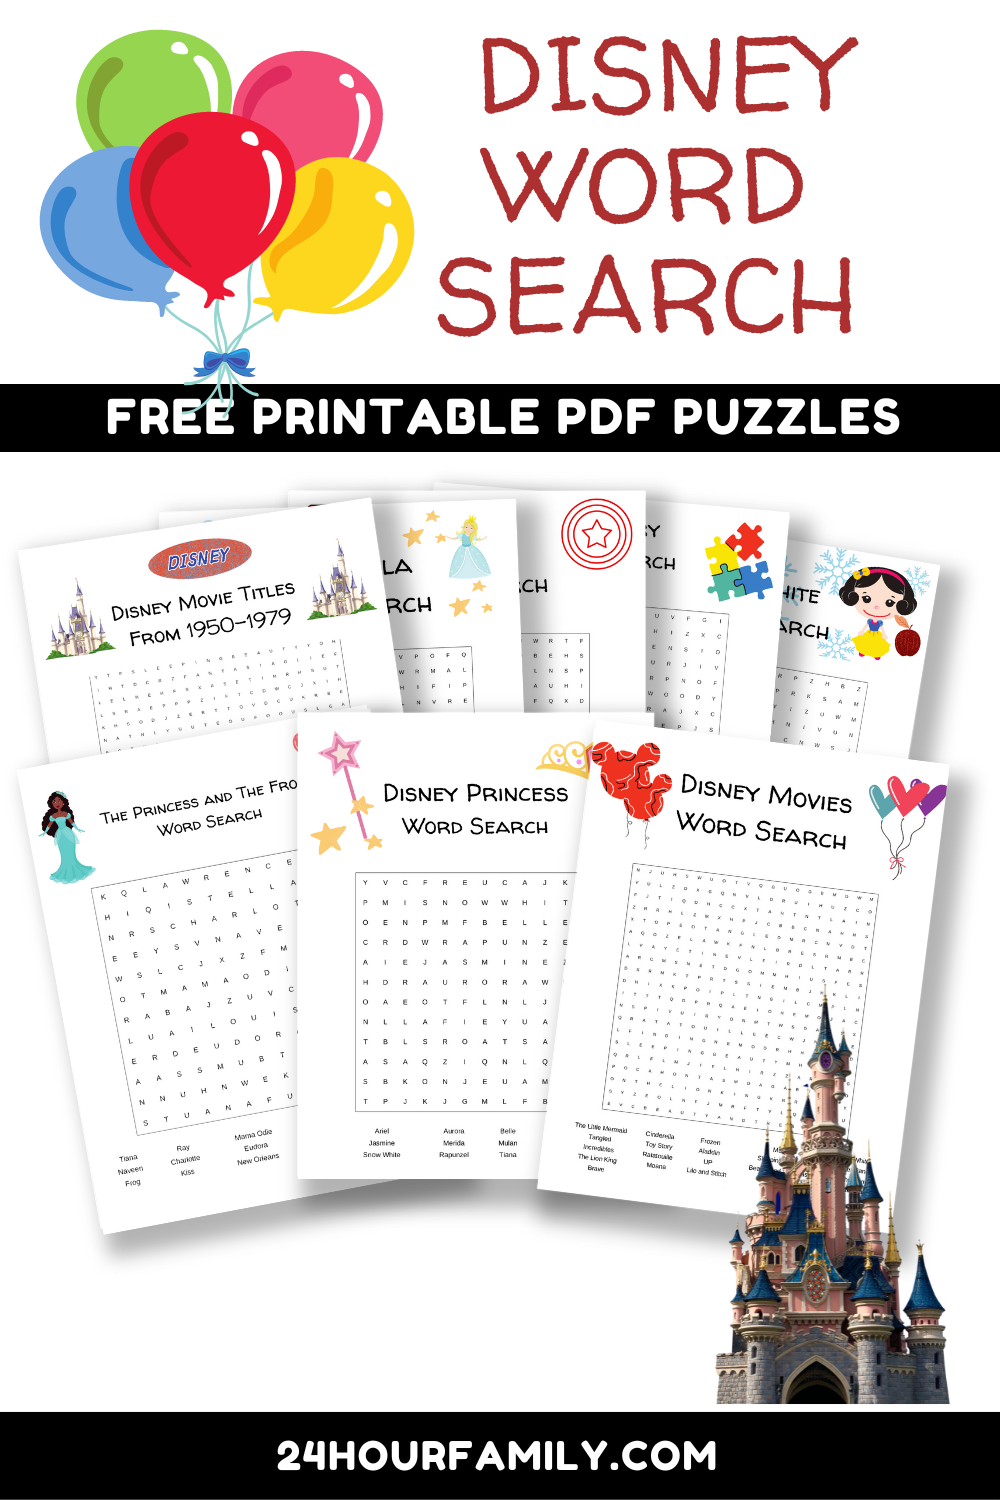 12 Free Disney Word Search Printables for Kids and Adults